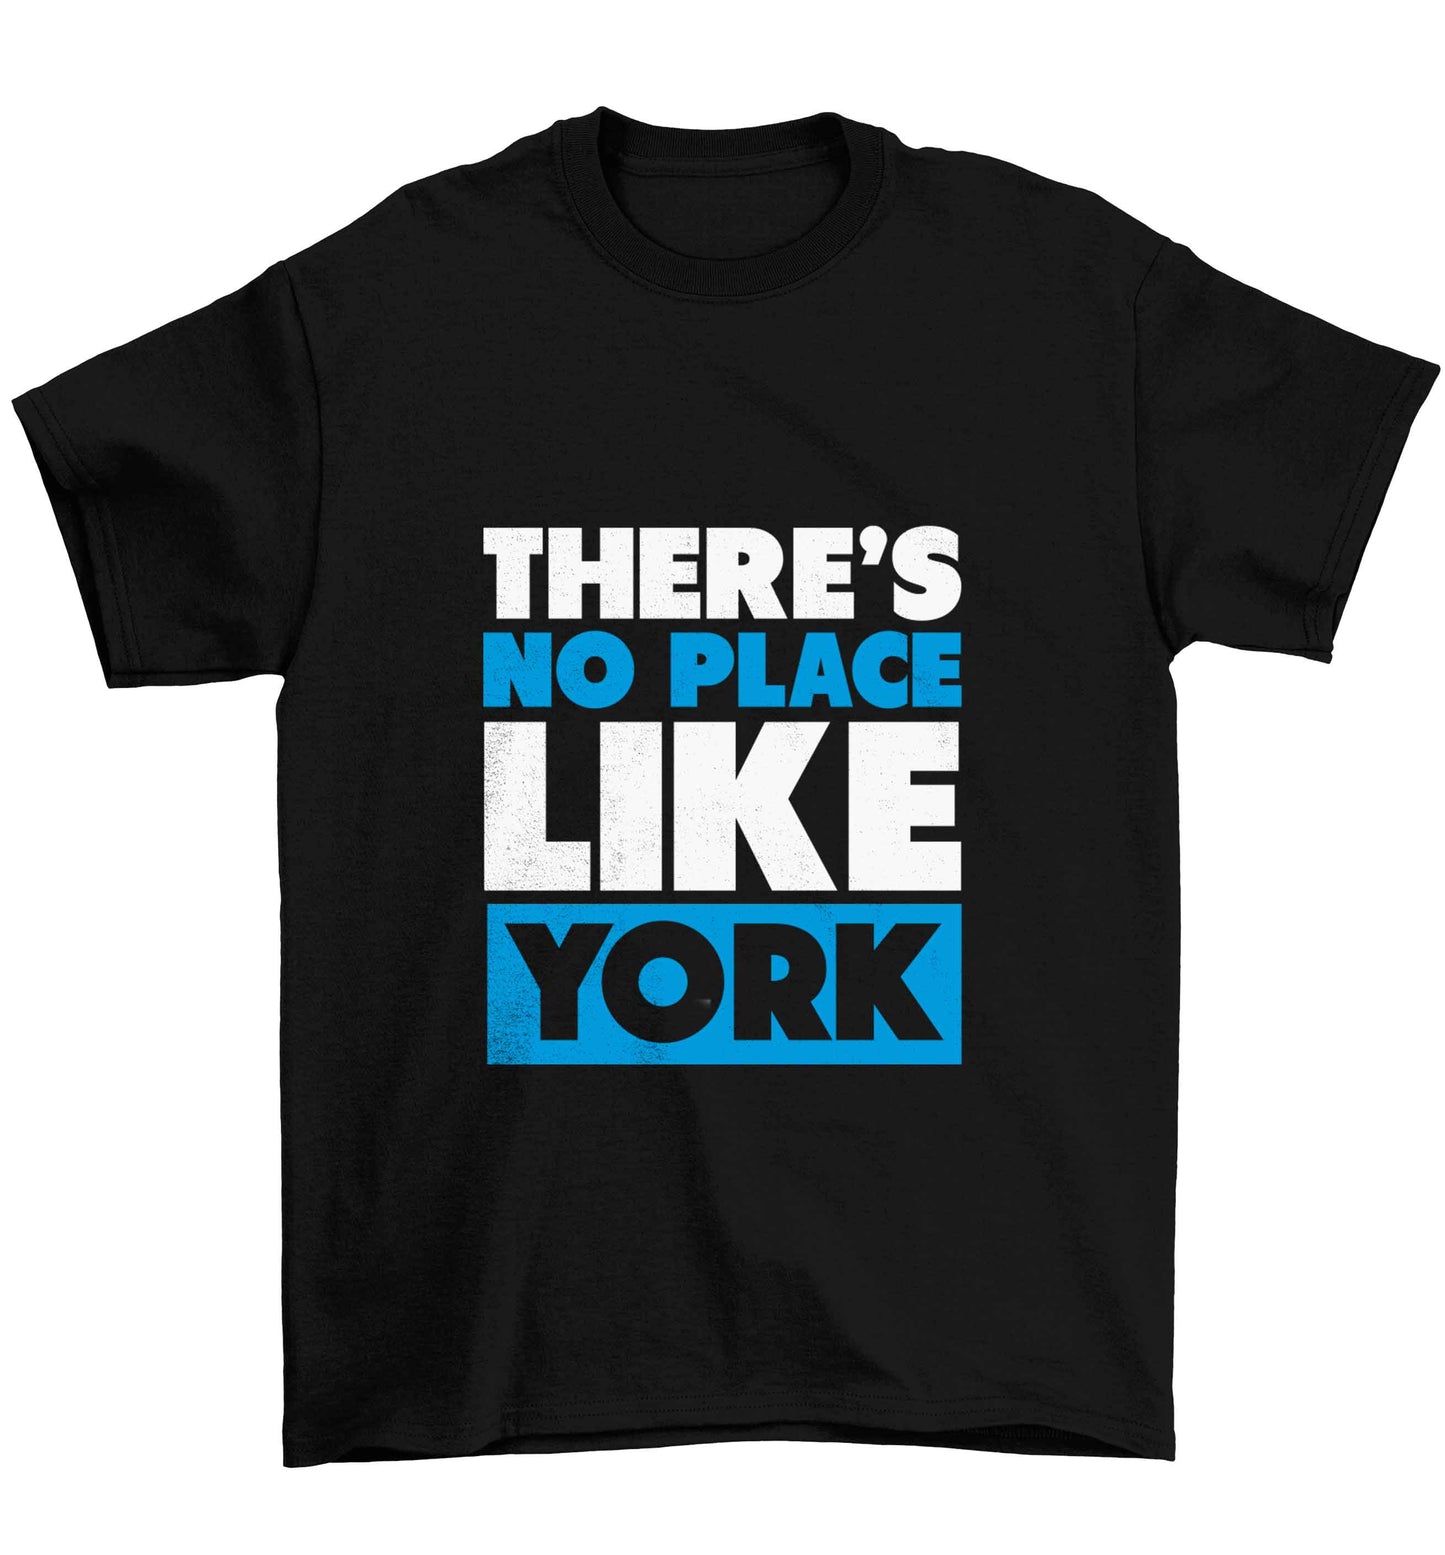 There's no place like york Children's black Tshirt 12-13 Years